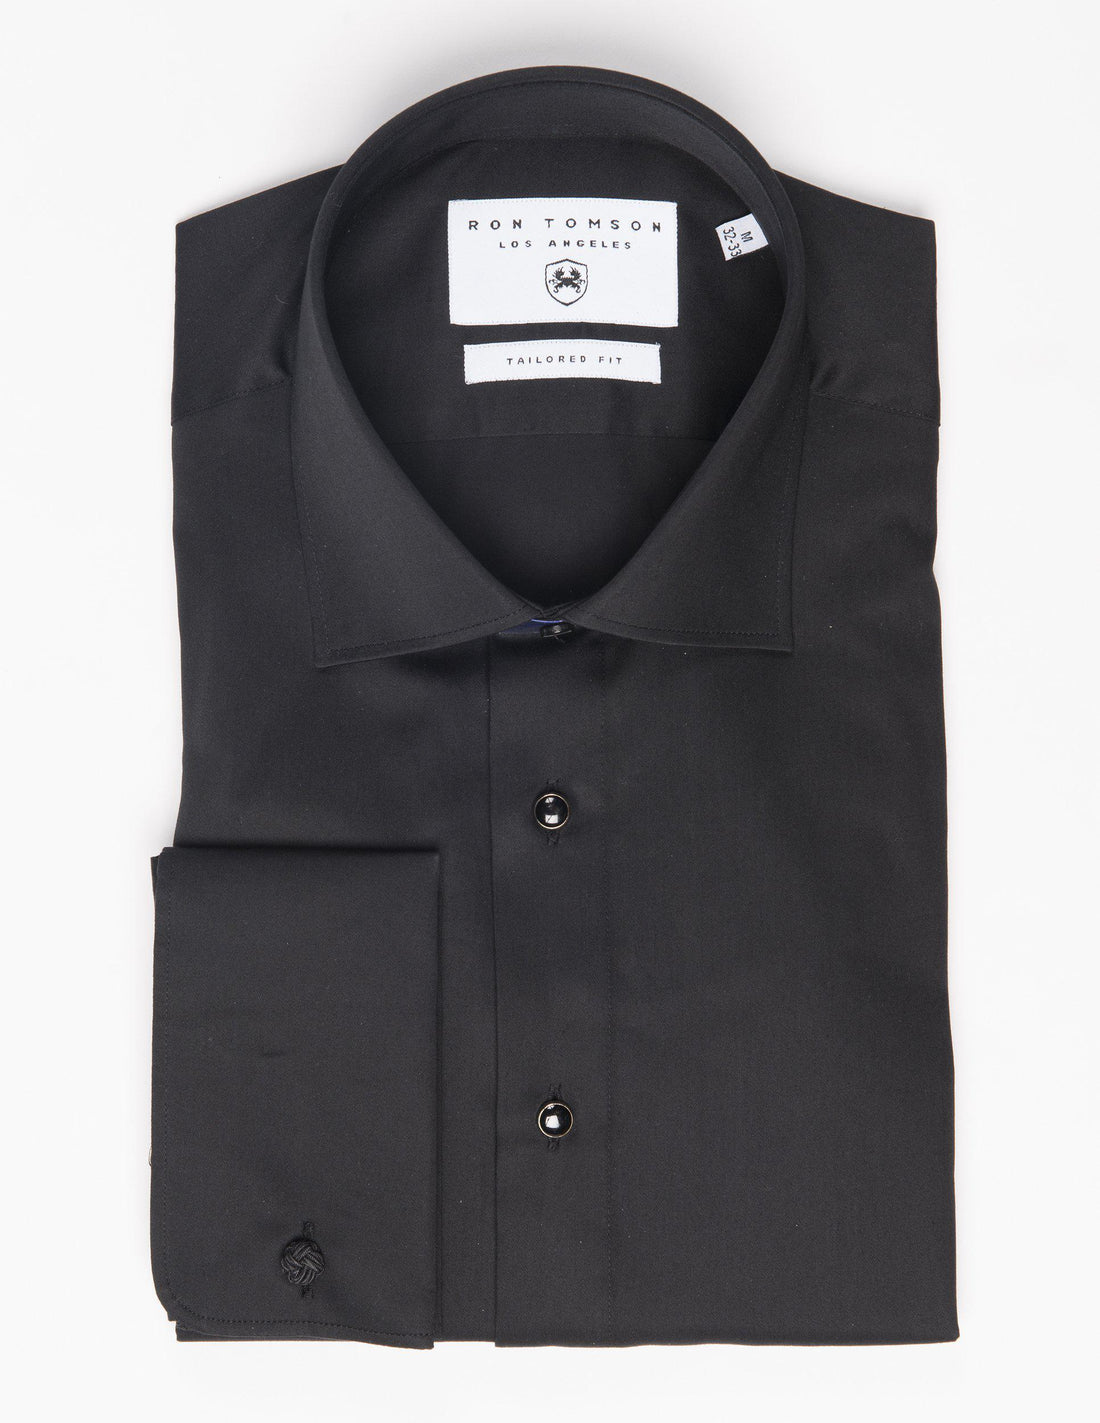 Classical Top 3 Removable Buttoned Tuxedo Shirt - Black - Ron Tomson